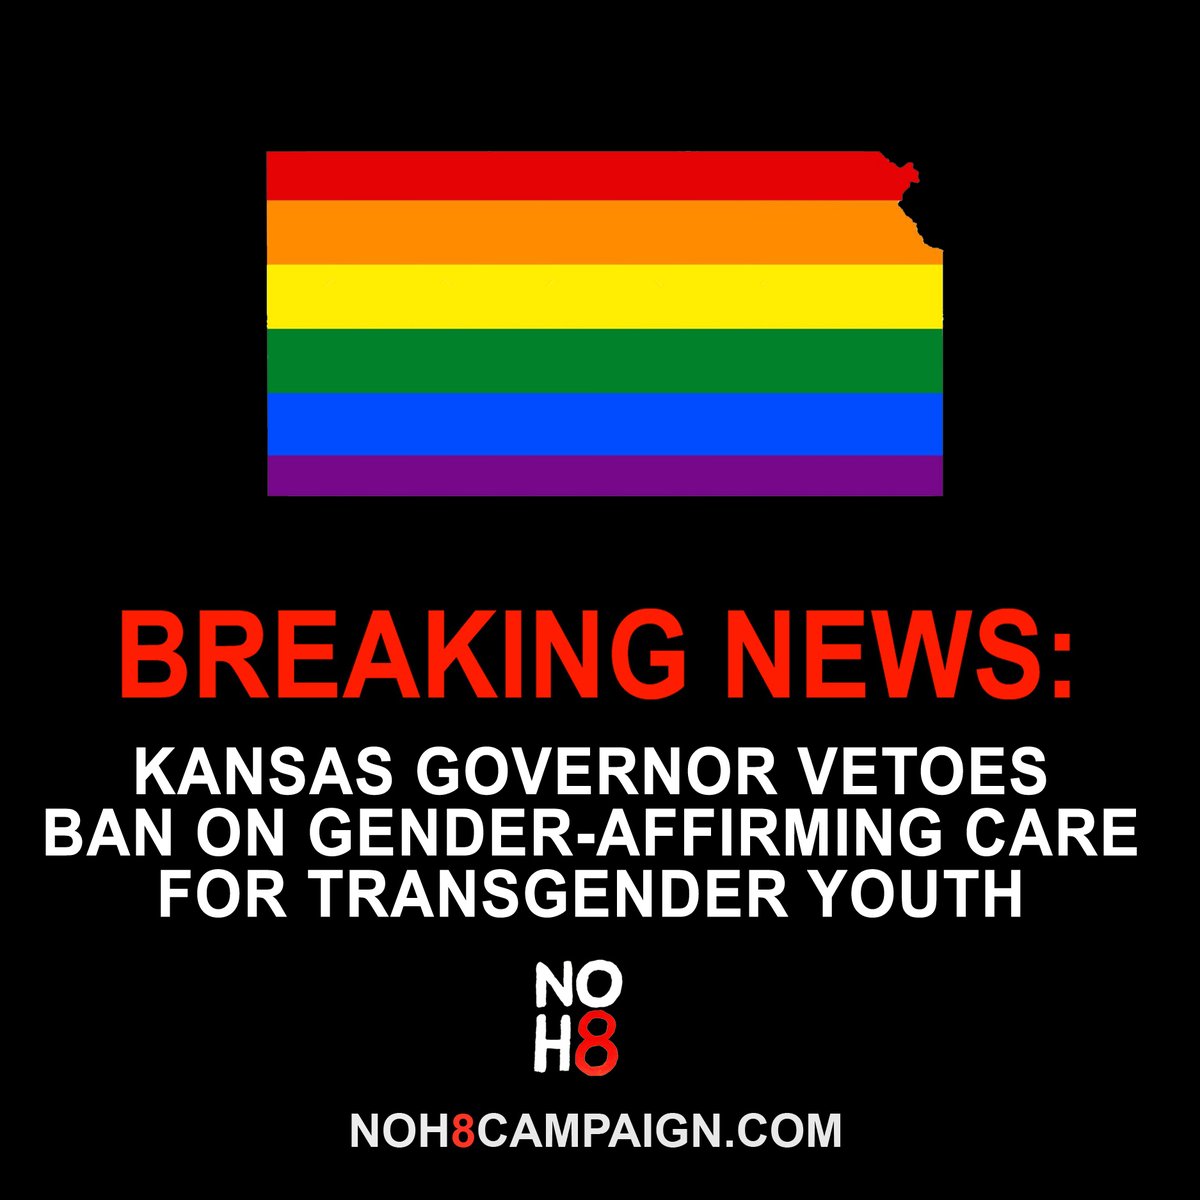 BREAKING: #Kansas governor vetoes ban on gender-affirming care for trans youth #NOH8